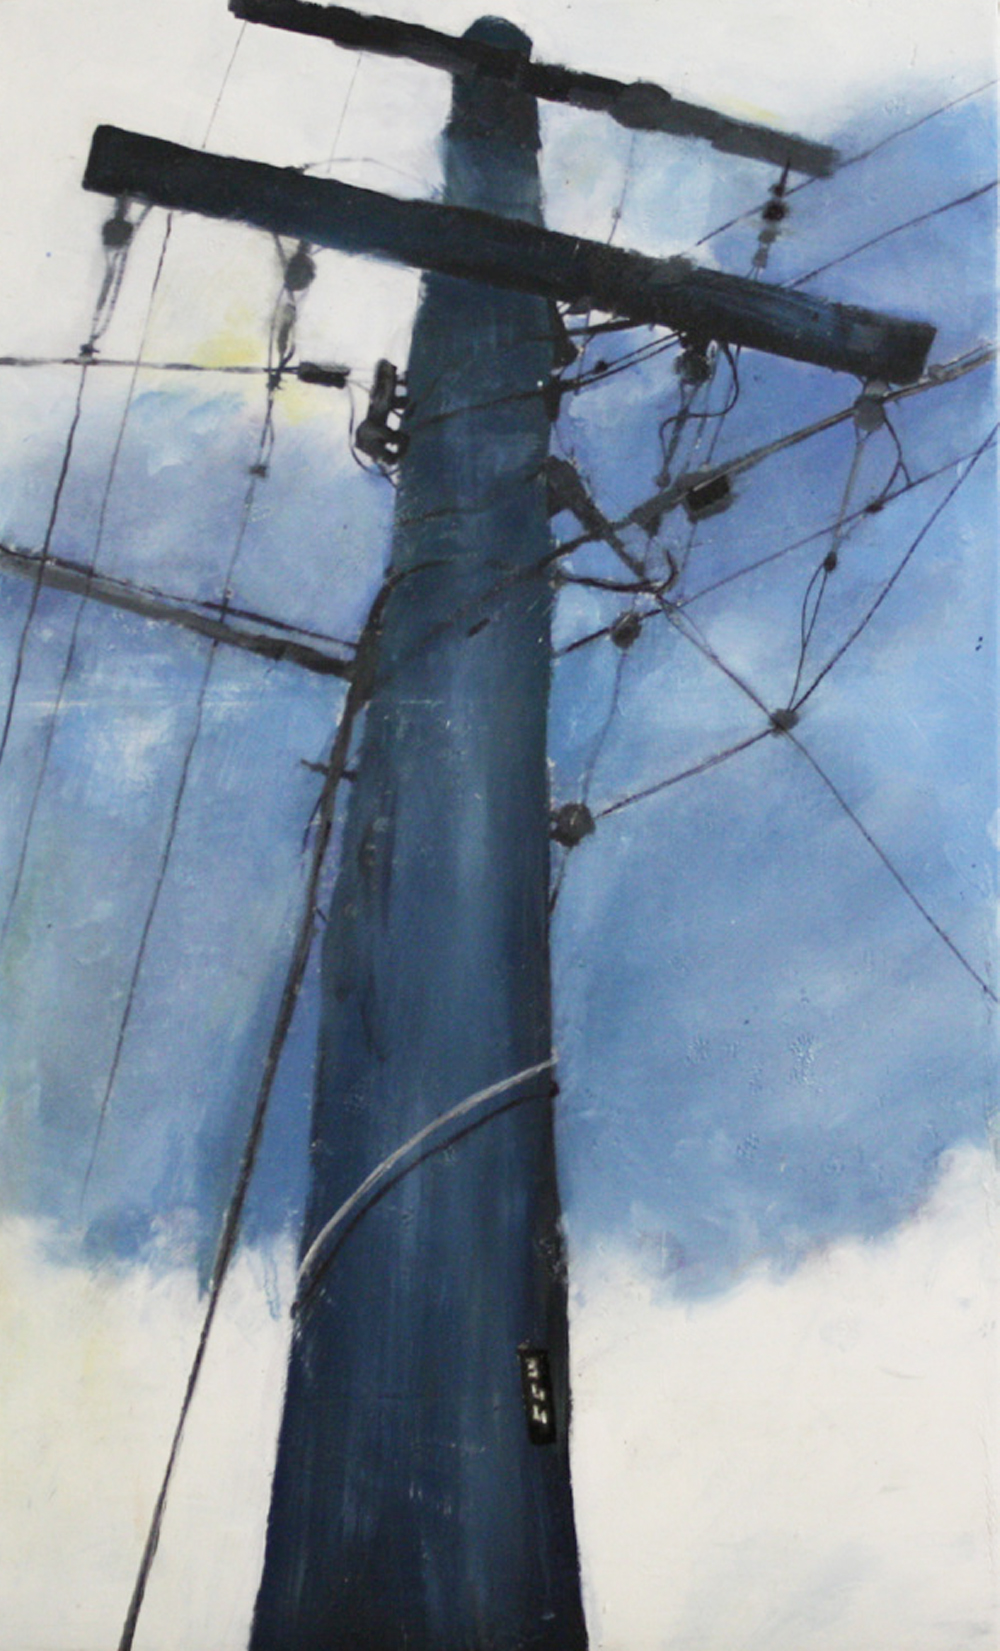  Looking Up:  344   2011,oil on canvas on hardboard  50 x 76 cm  private collection     